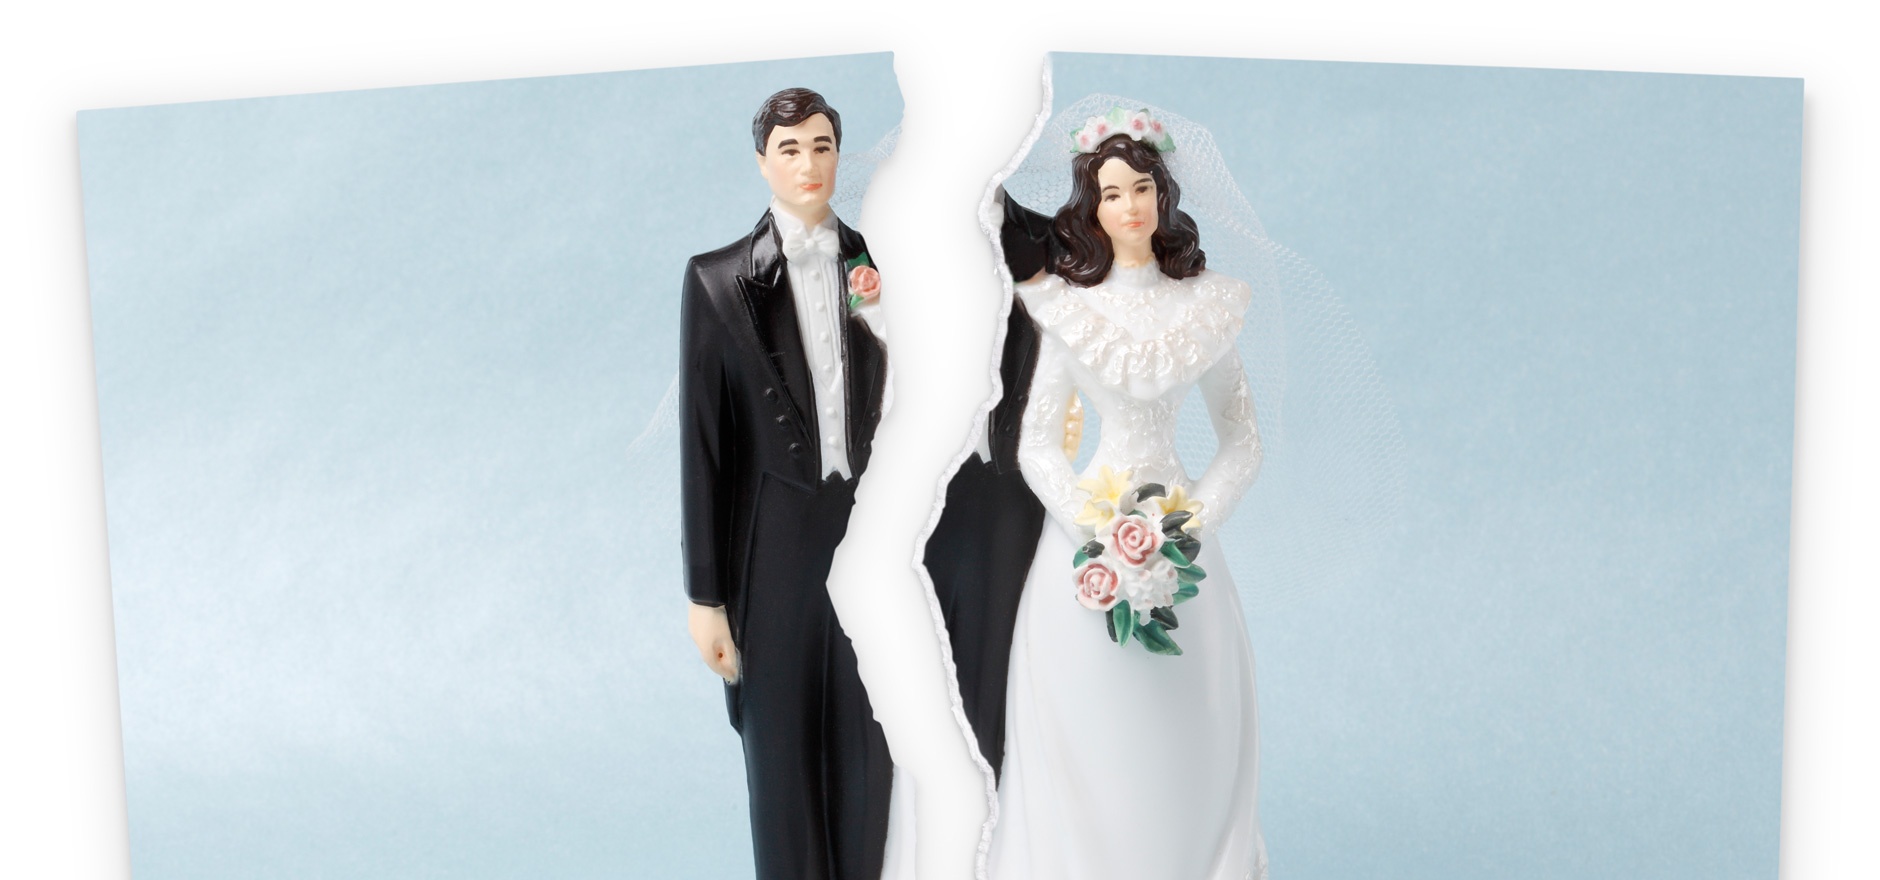 couples in arranged marriages lower divorce rate